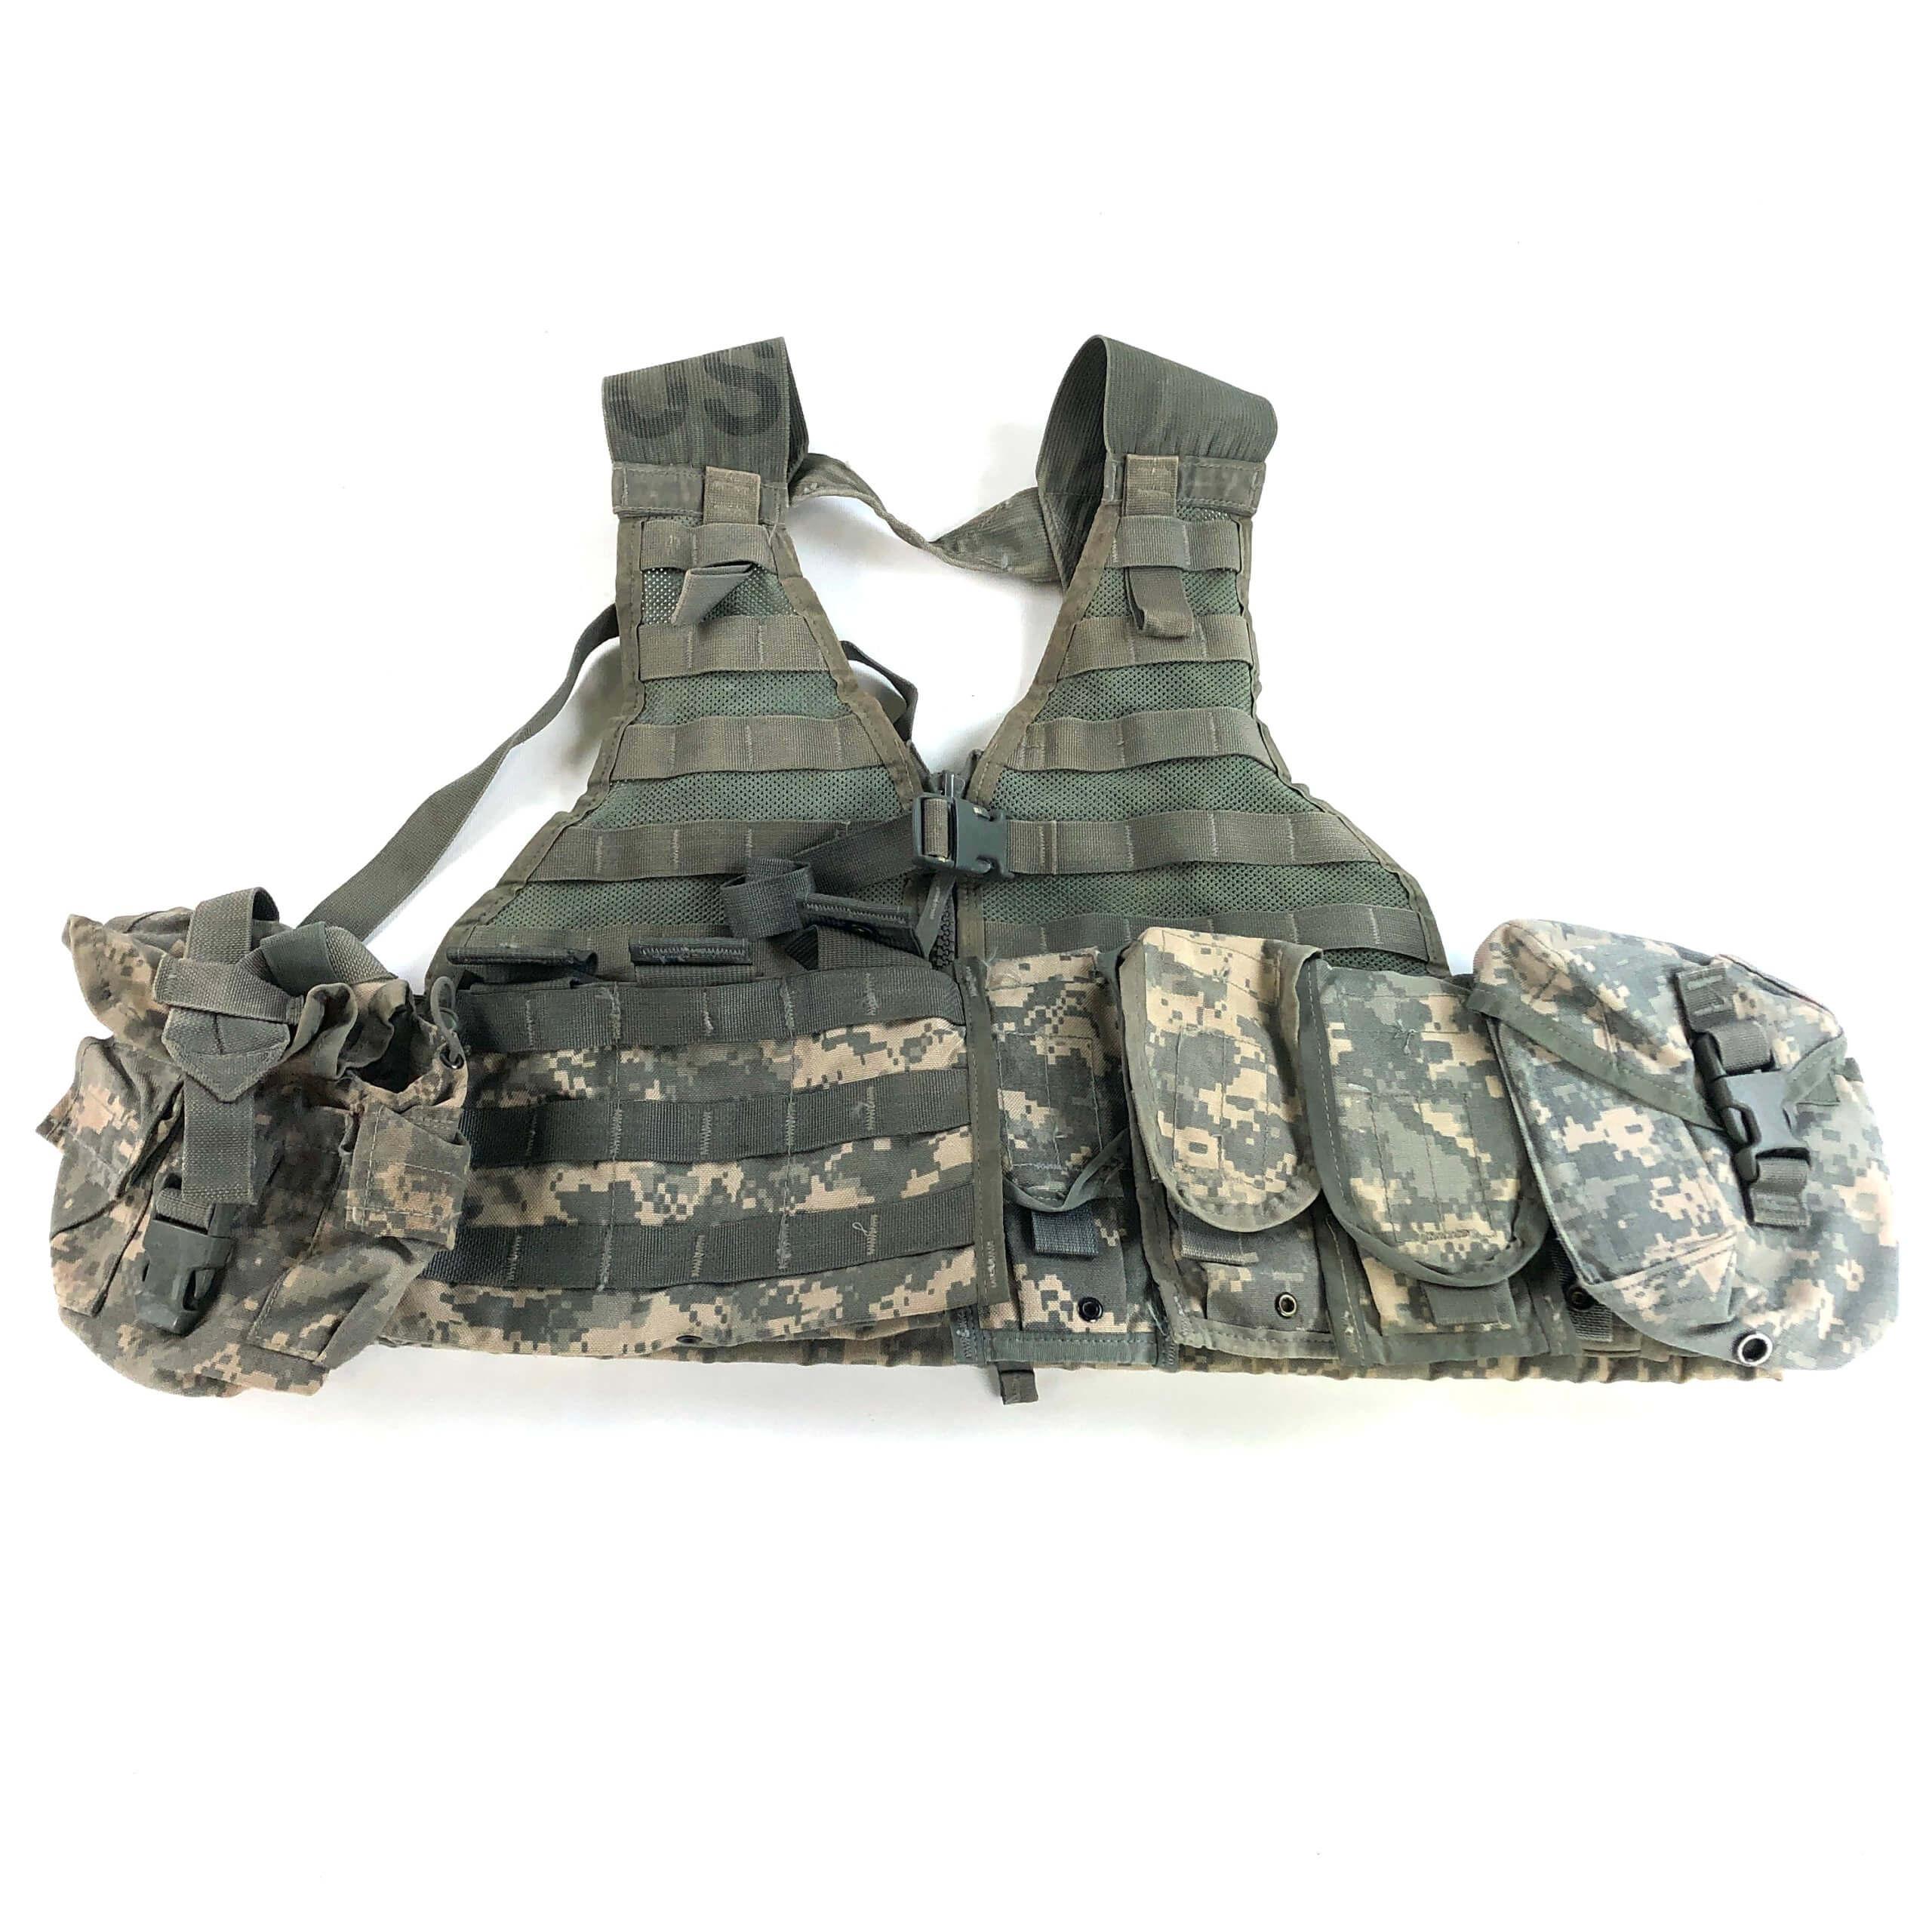 New in Bag ACU Fighting Load Carrier FLC Tactical Vest US Military MOLLE 